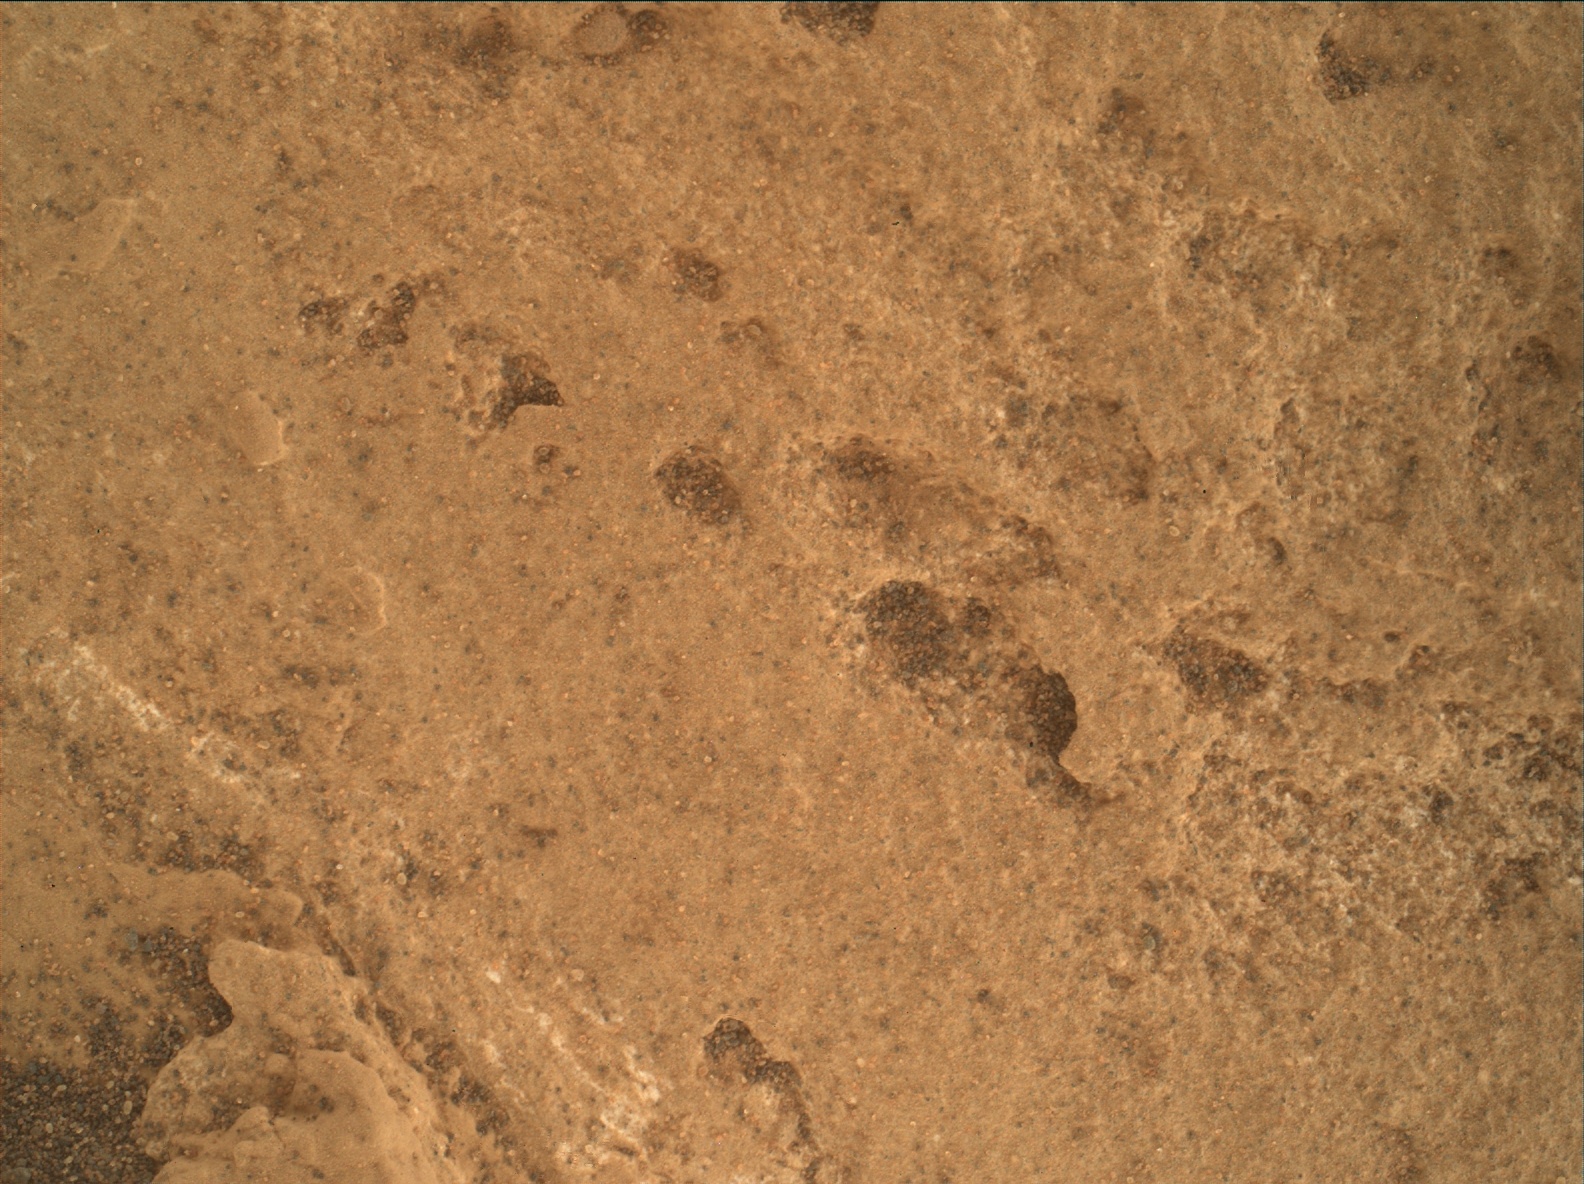 Nasa's Mars rover Curiosity acquired this image using its Mars Hand Lens Imager (MAHLI) on Sol 1685